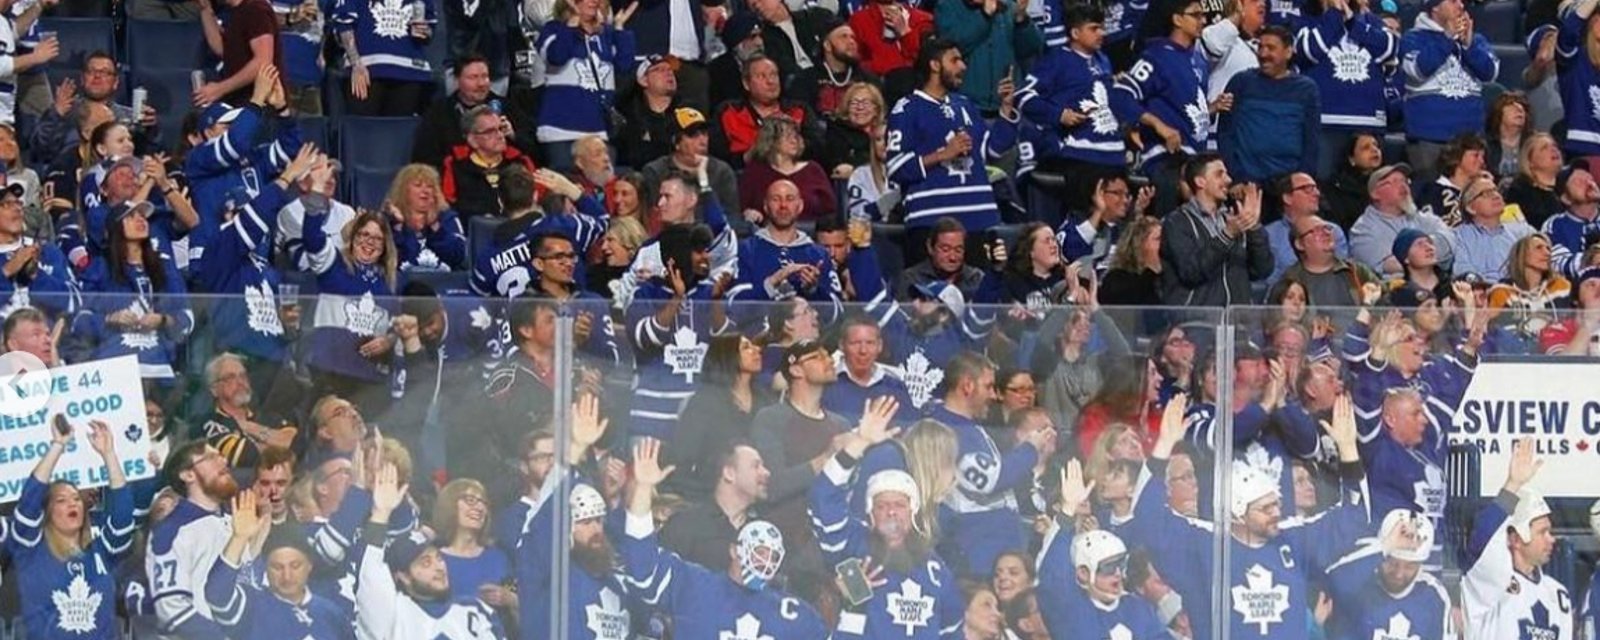 Arena takeover in progress against Leafs after players complained!